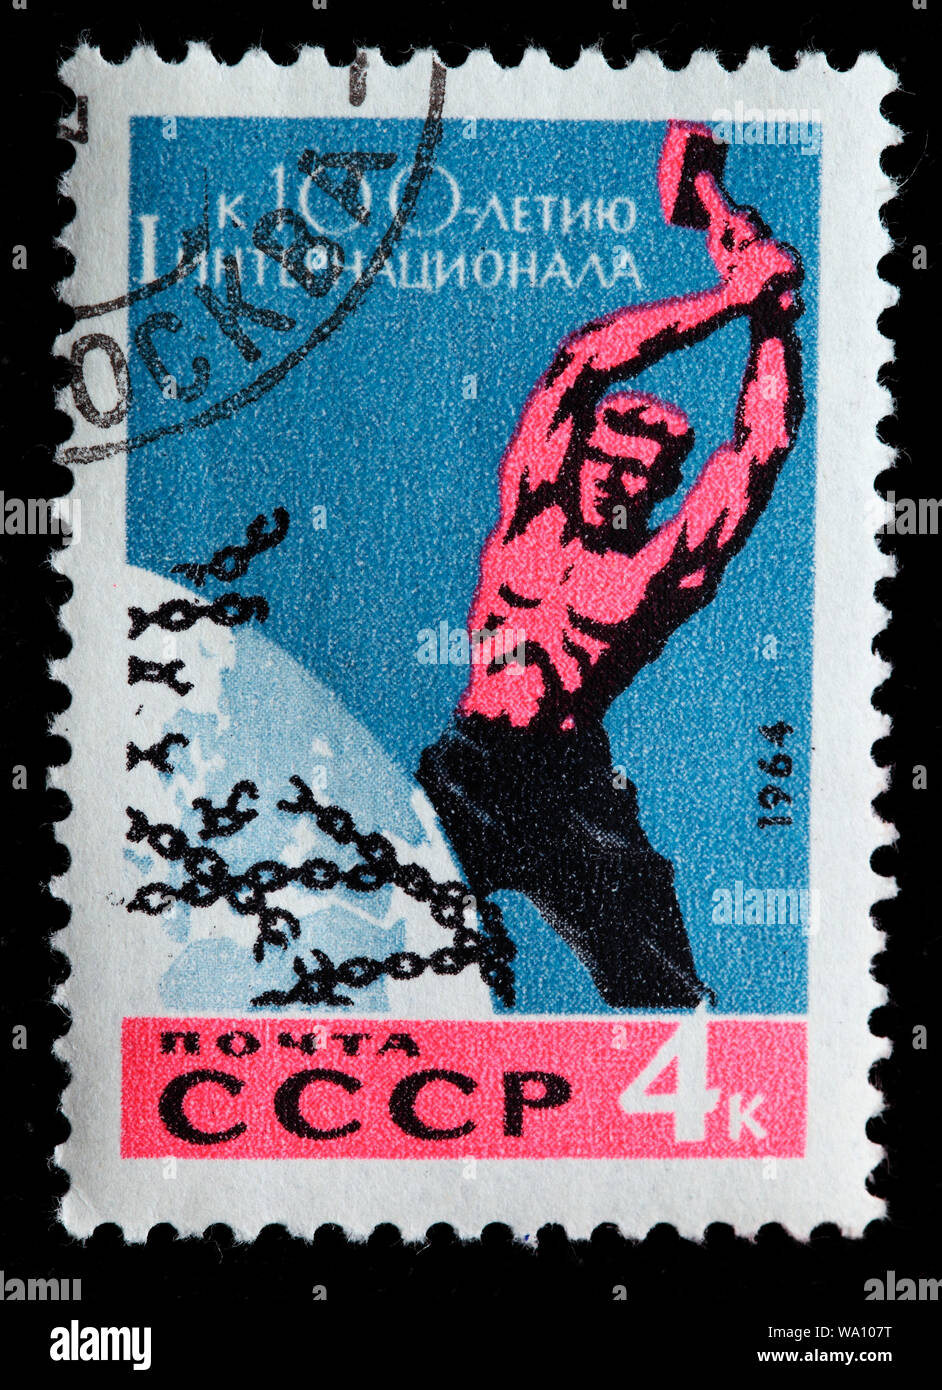 Worker broken chains, Centenary of First International, postage stamp, Russia, USSR, 1964 Stock Photo